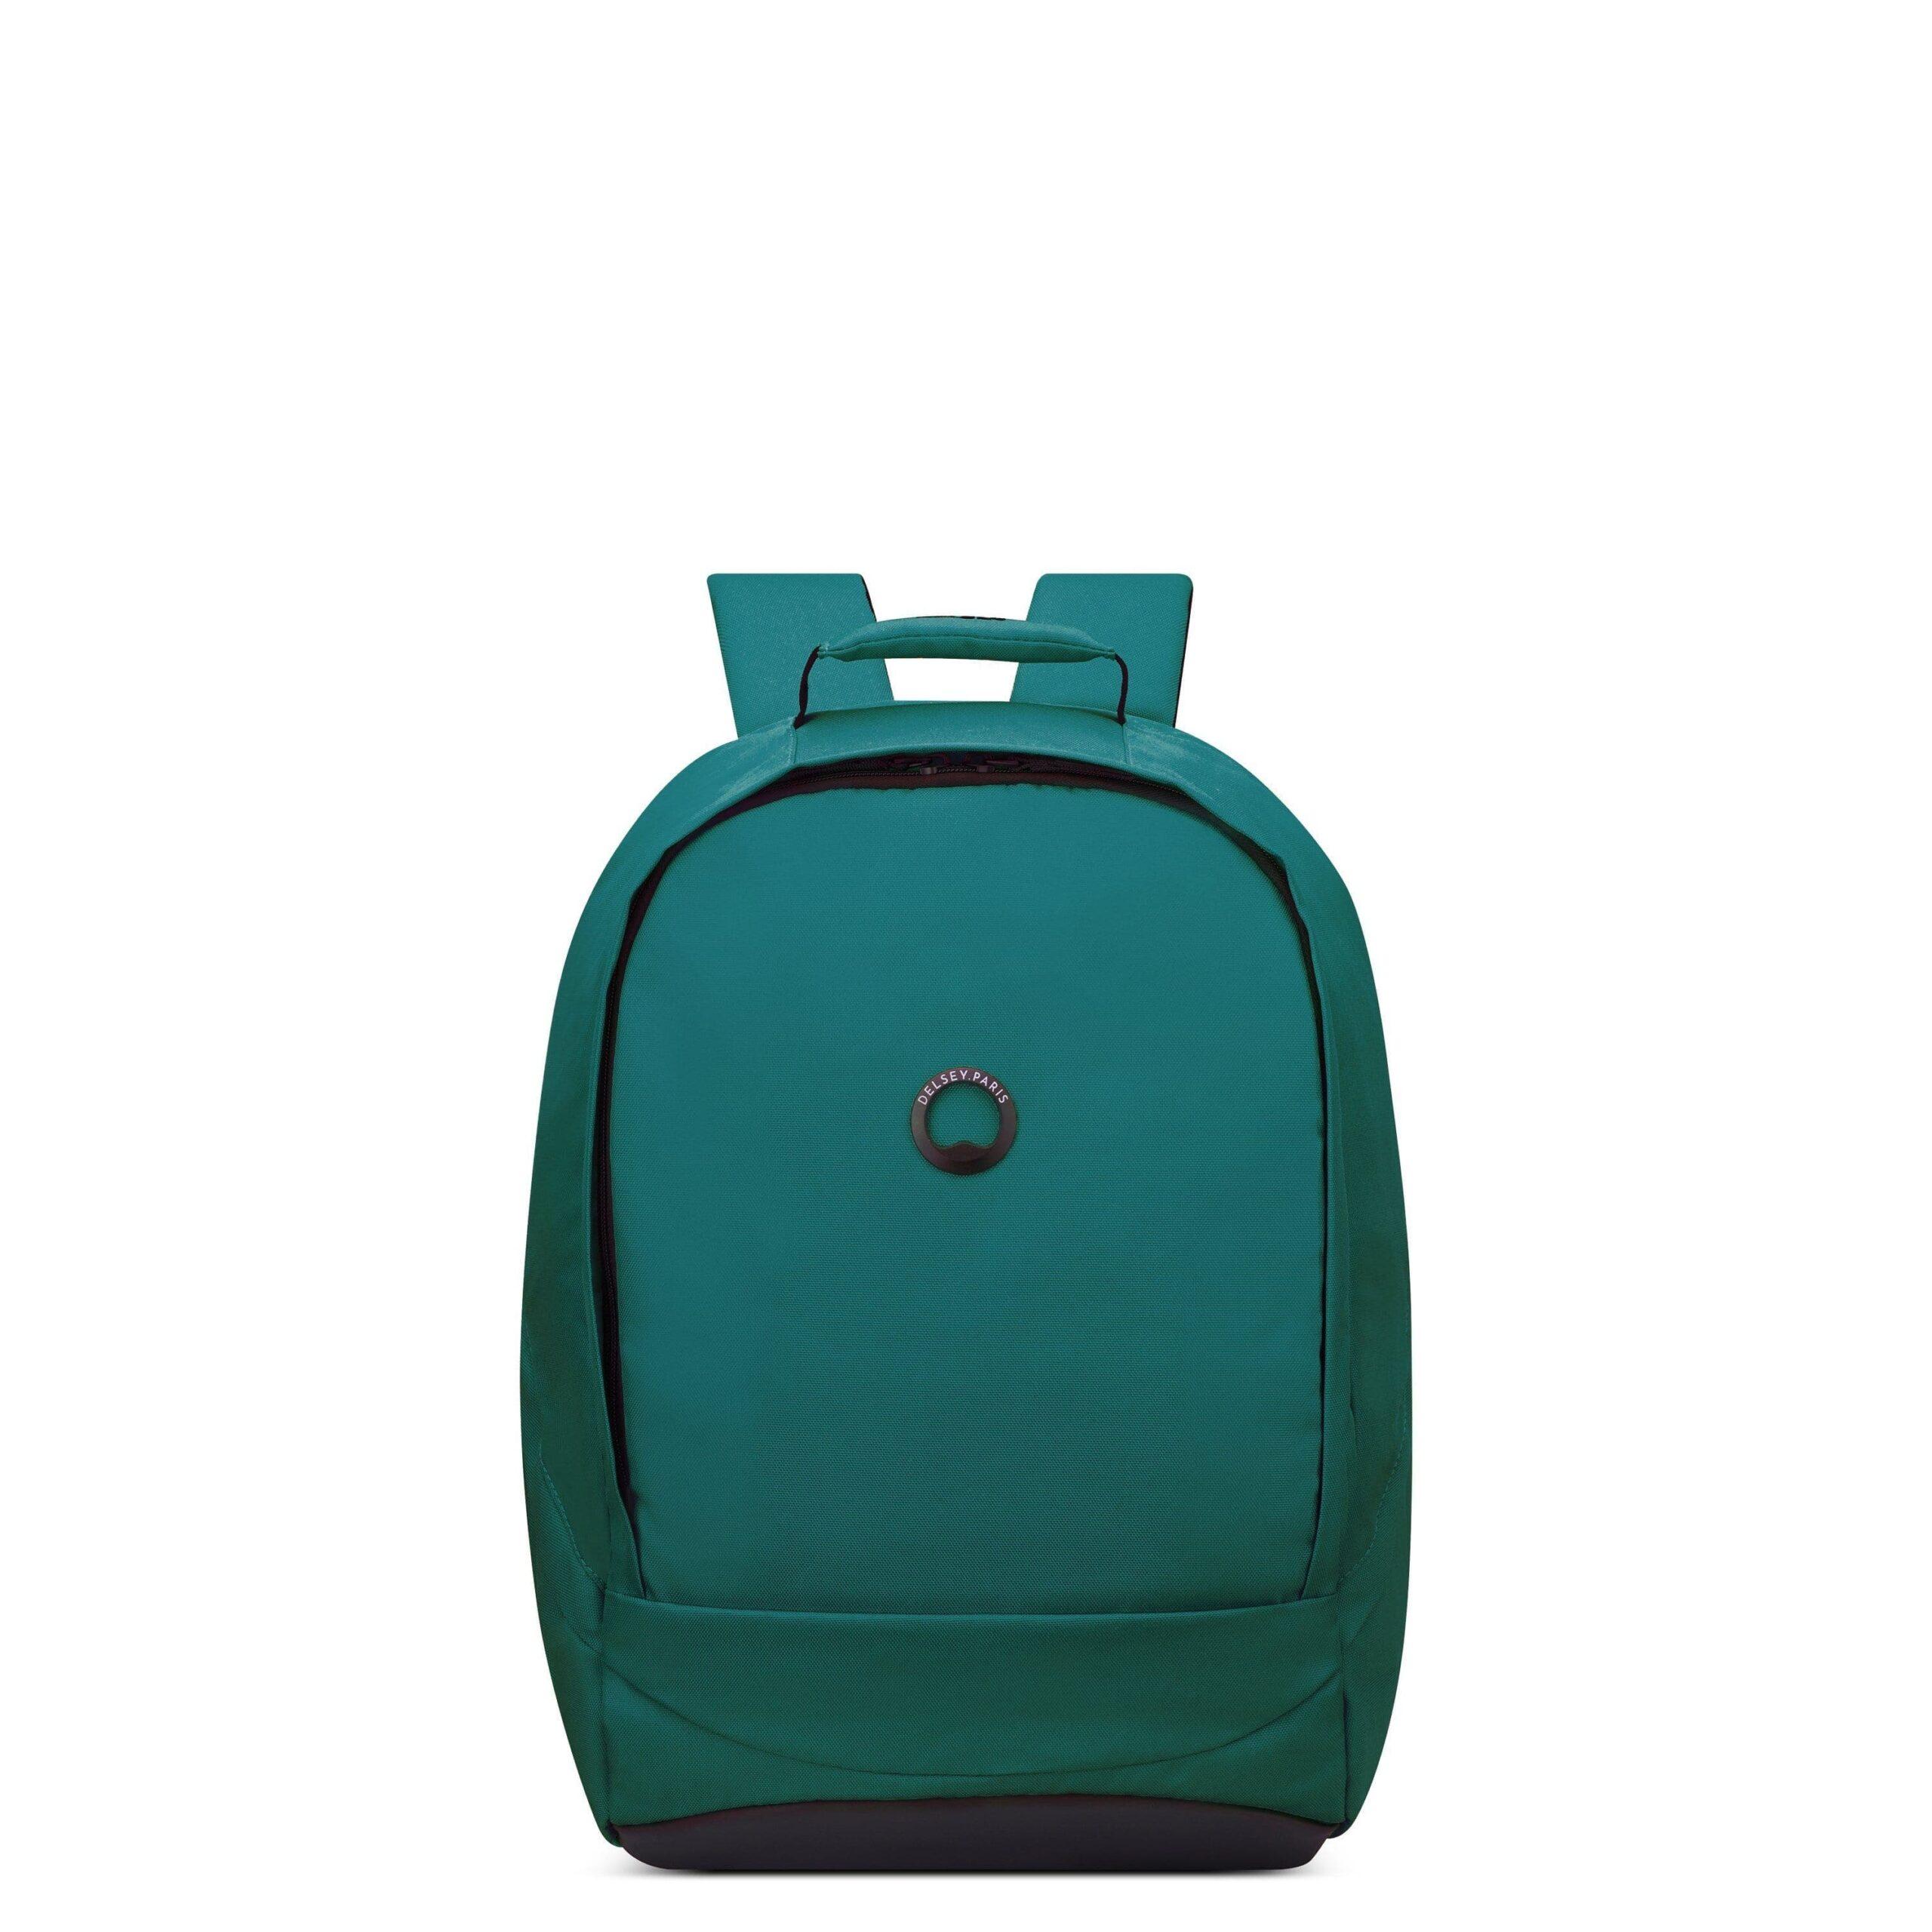 Delsey Securban 15.6" Laptop Protection Backpack Green - 00333460003